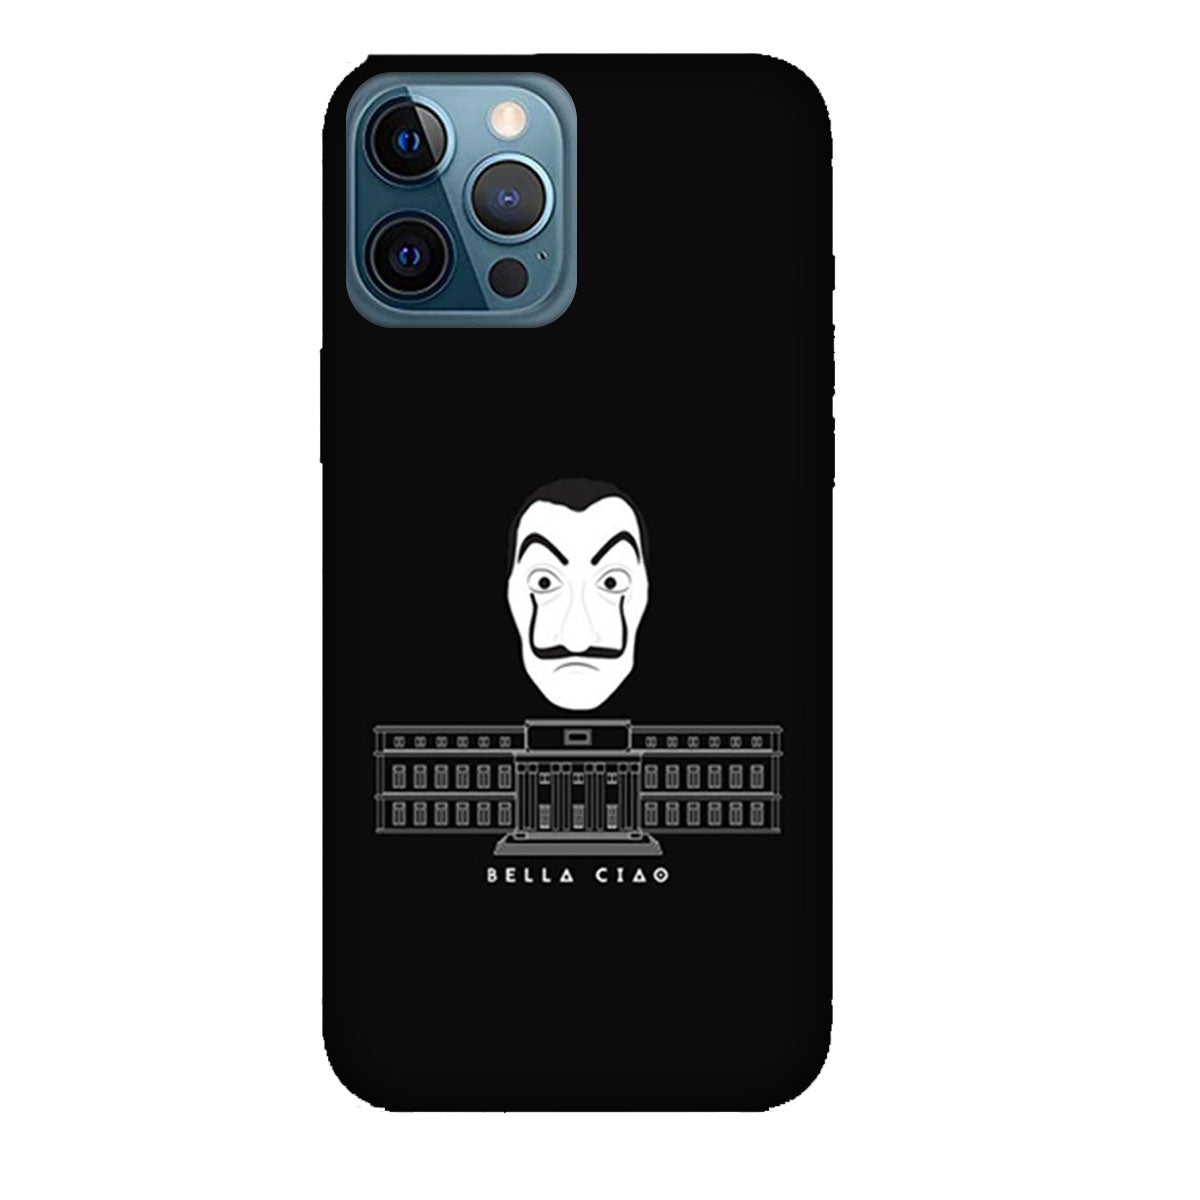 Bella Ciao - Money Heist - Mobile Phone Cover - Hard Case